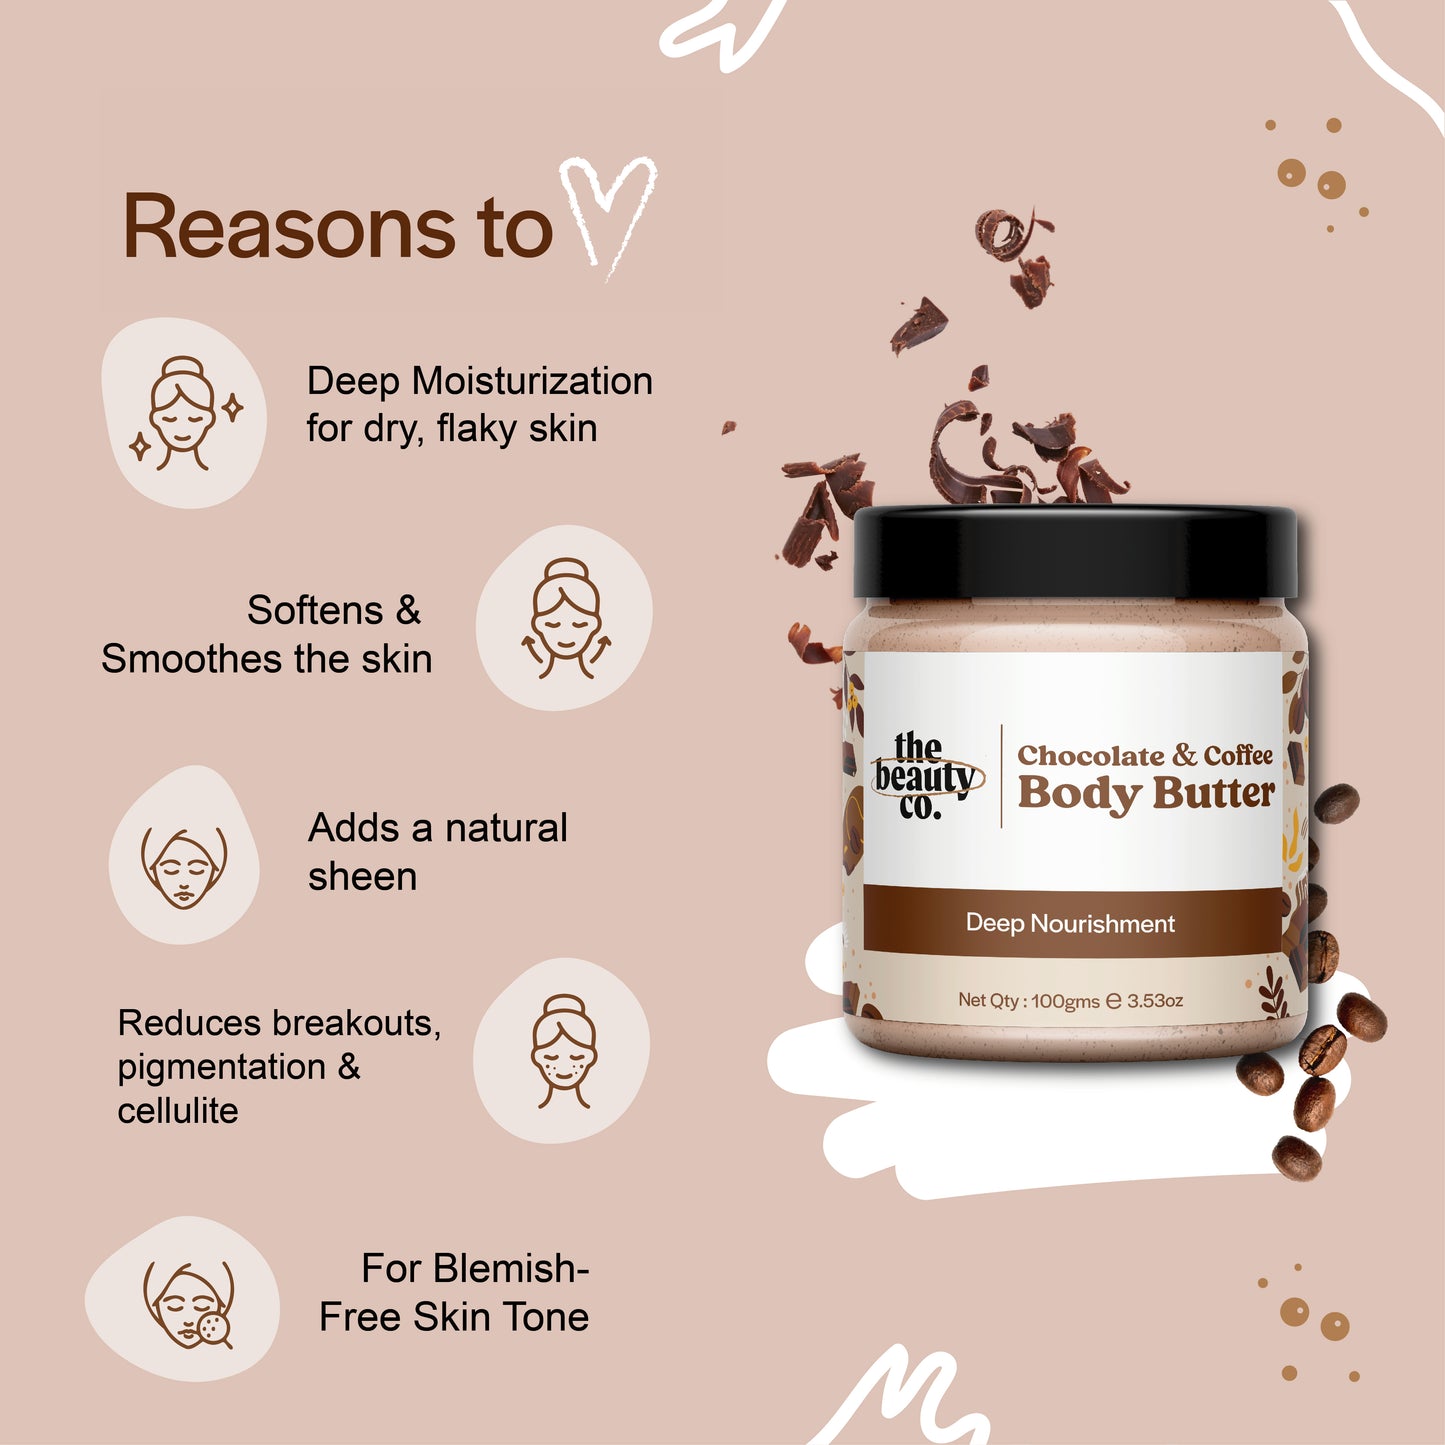 Chocolate & Coffee Body Butter With Robusta Coffee